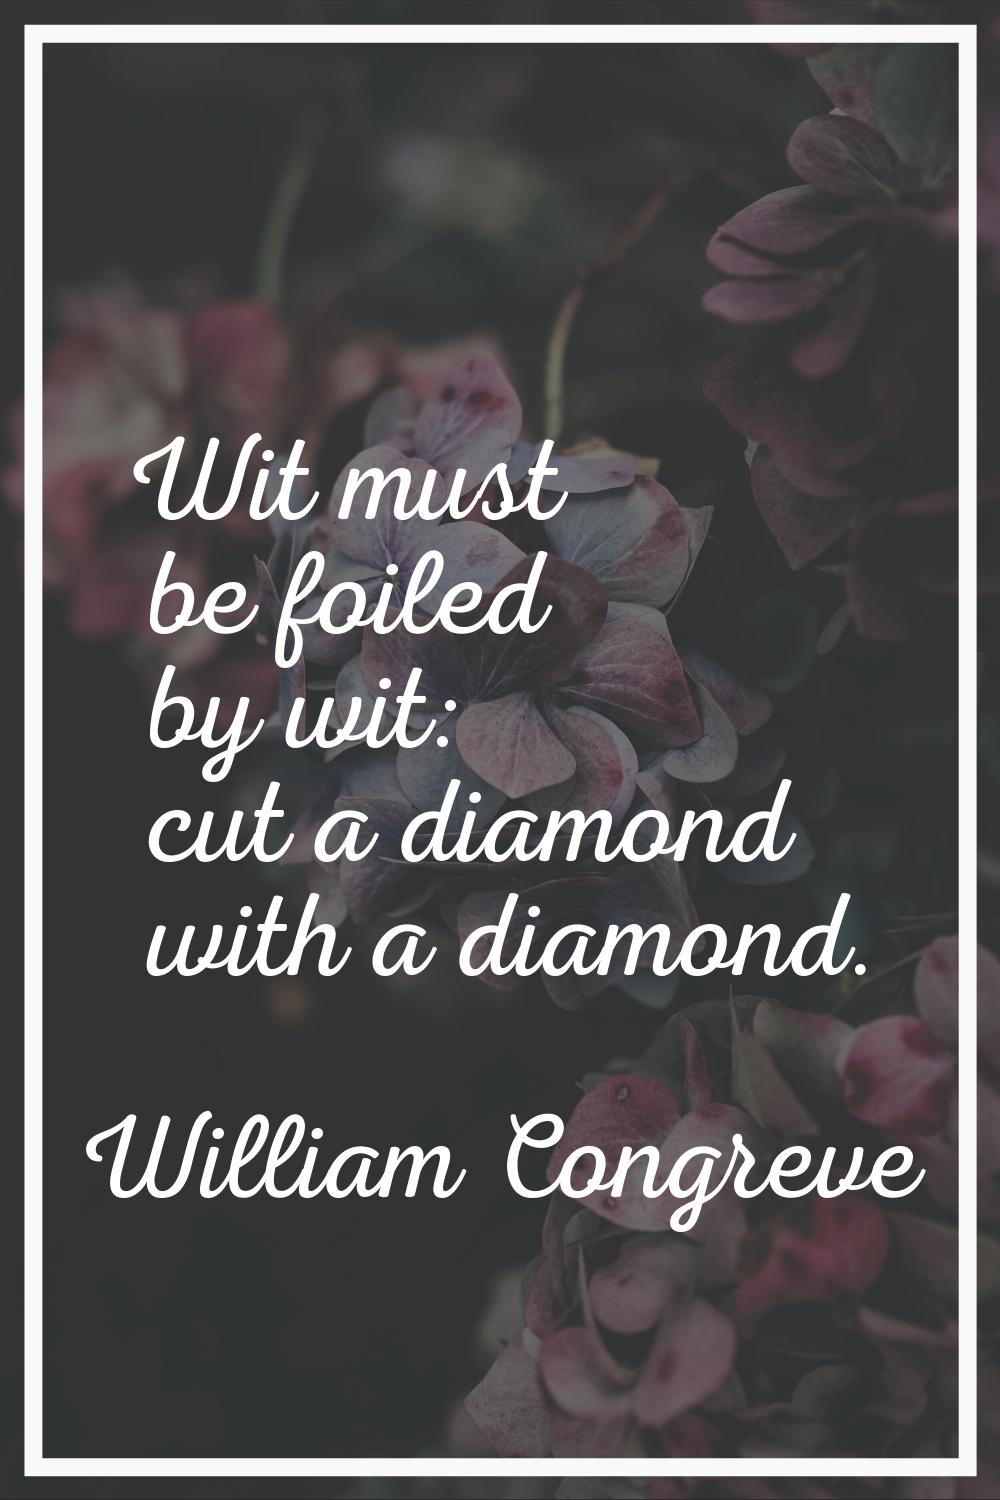 Wit must be foiled by wit: cut a diamond with a diamond.